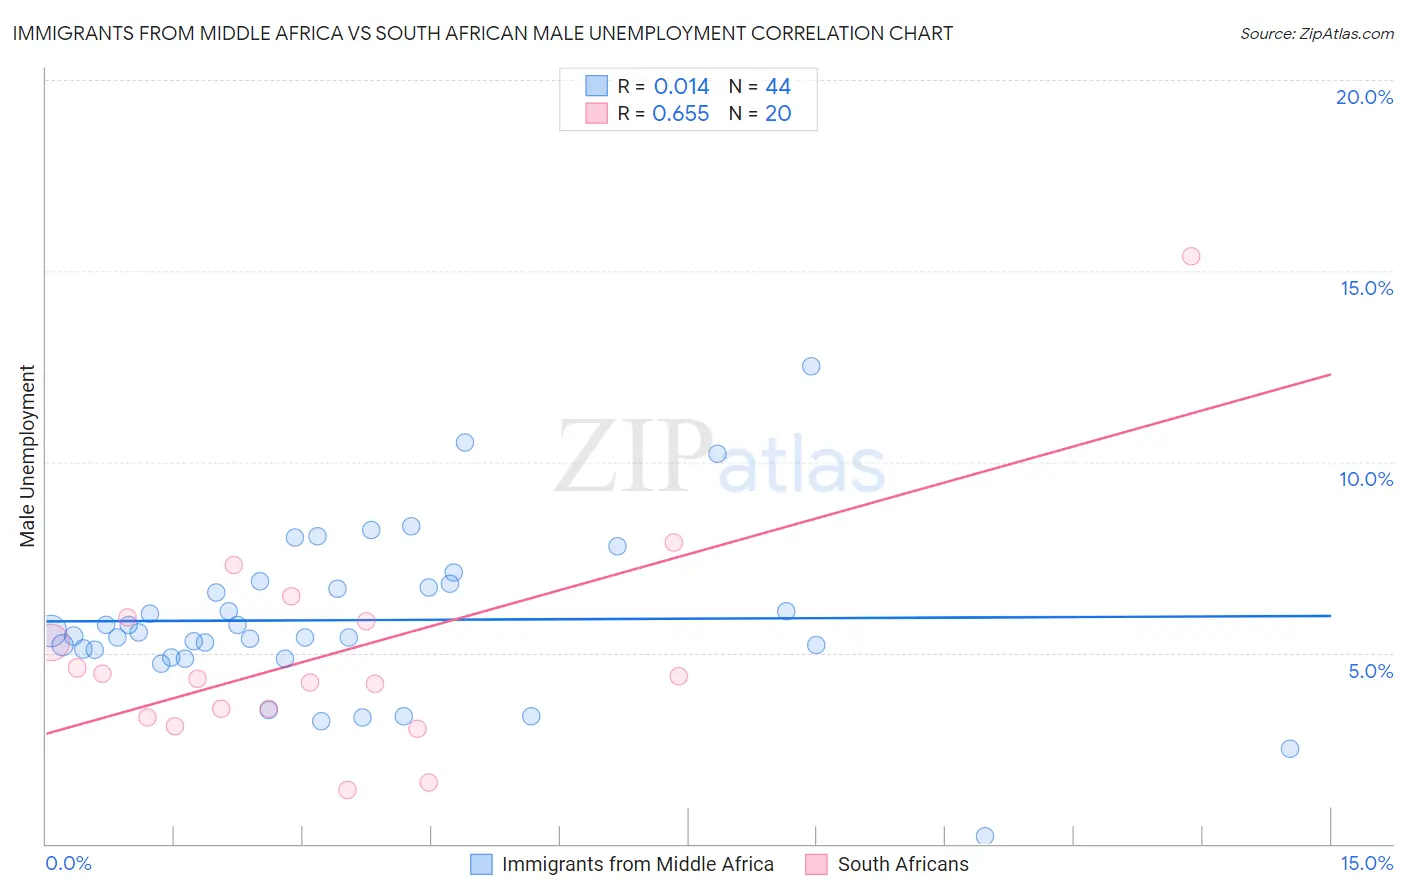 Immigrants from Middle Africa vs South African Male Unemployment